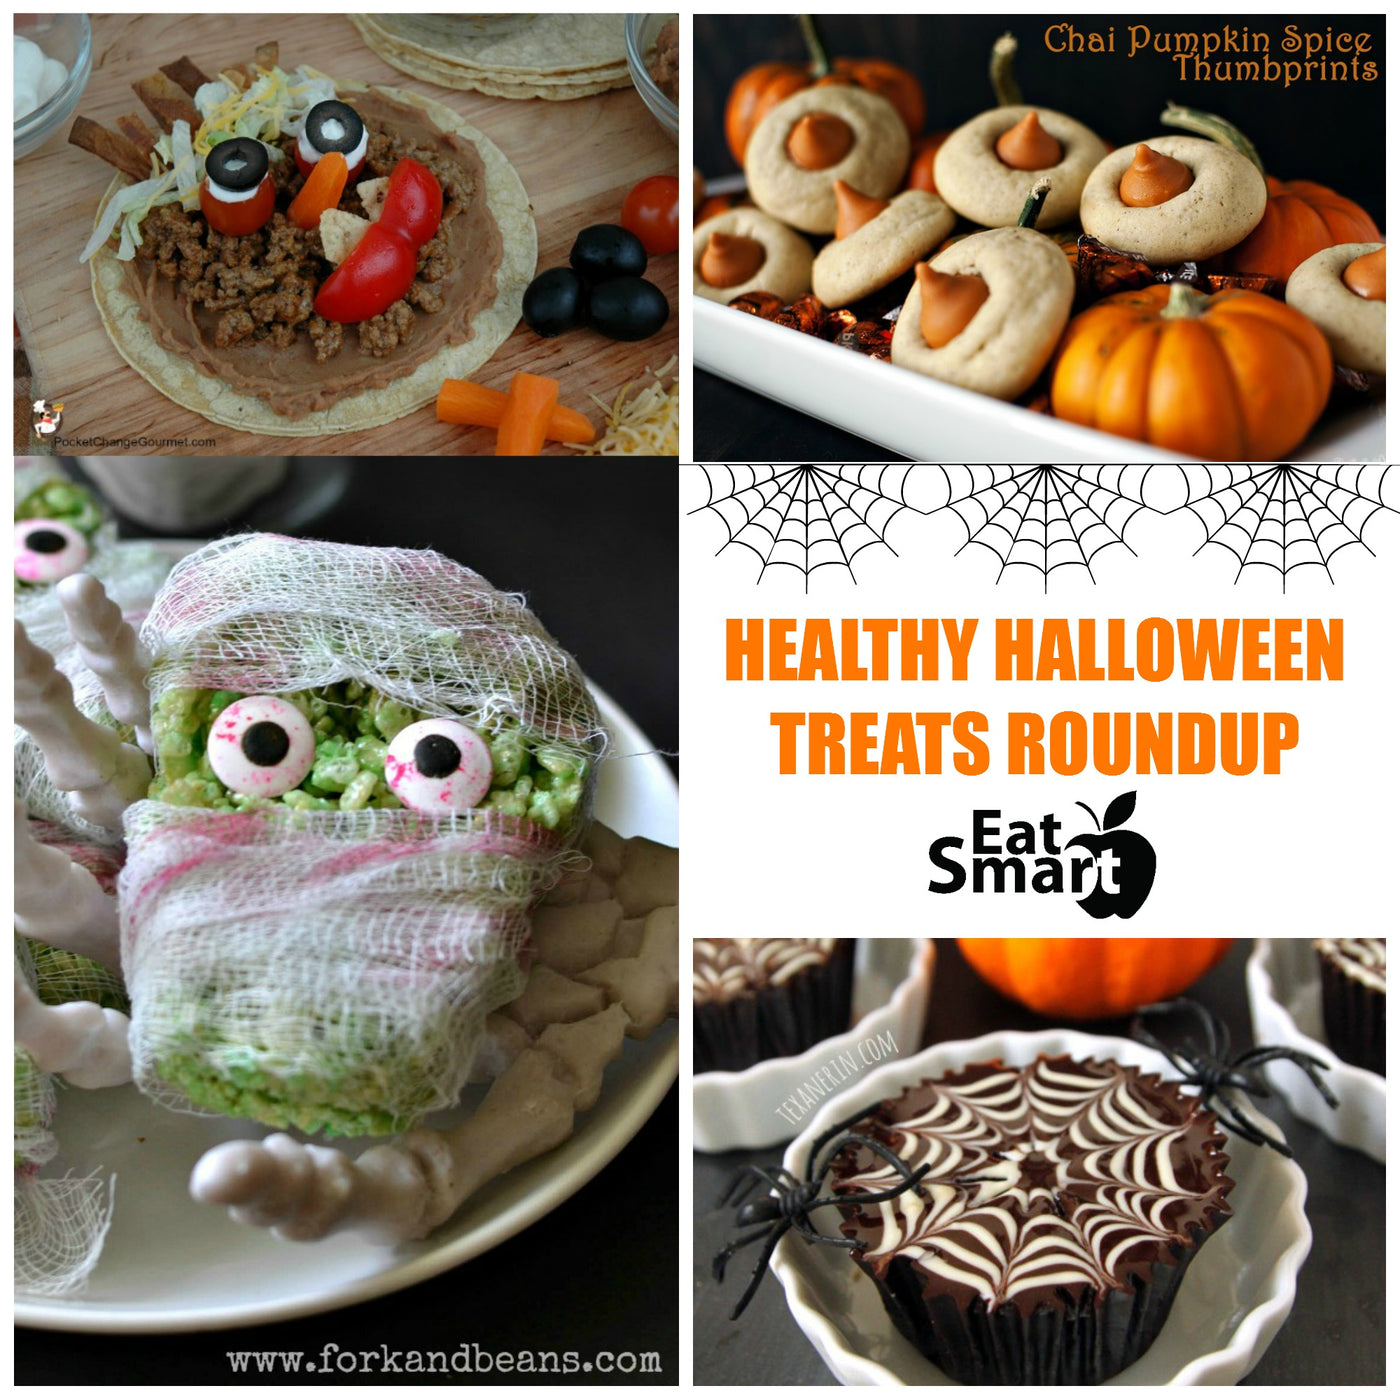 Don’t Be Tricked, Try Some Fun and Healthy Halloween Treats